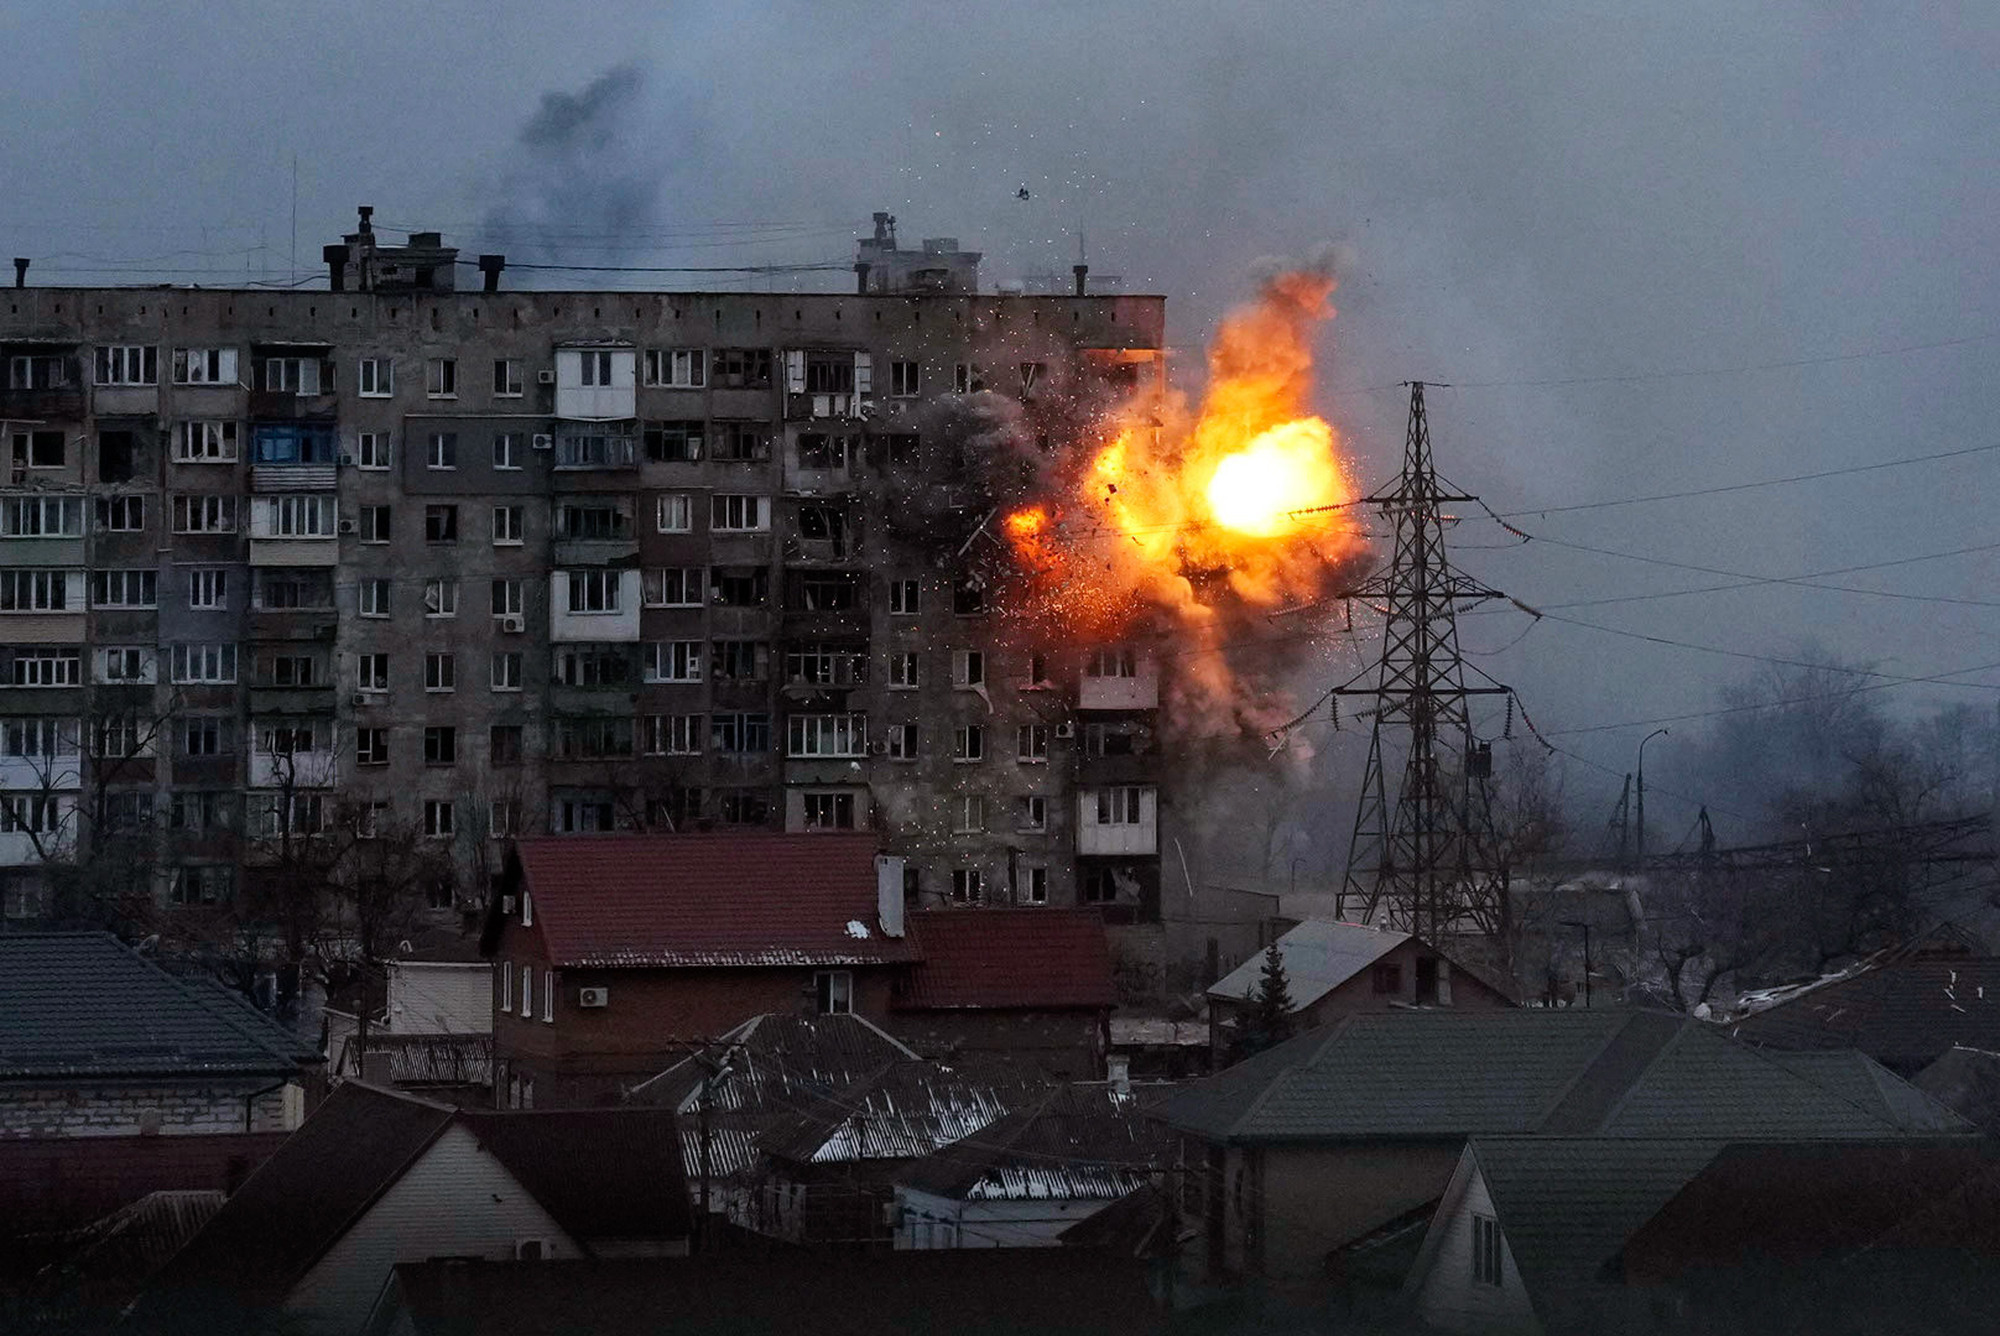 An explosion is seen in an apartment building after Russian's army tank fires in Mariupol, Ukraine, March 11, 2022. Still from FRONTLINE PBS and AP’s feature film “20 Days in Mariupol.” 